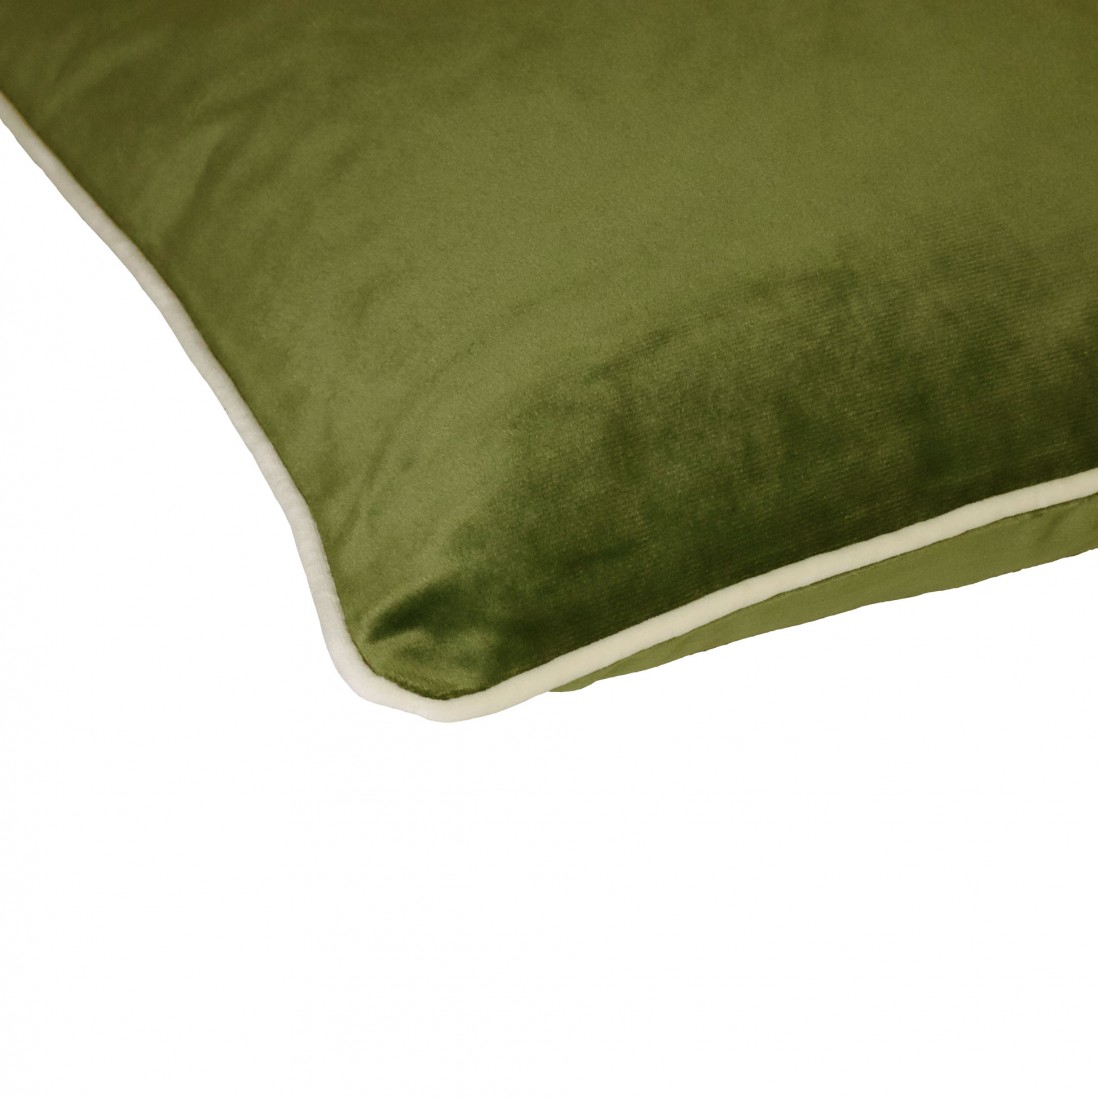 GREEN MELLOW CUSHION WITH PIPING